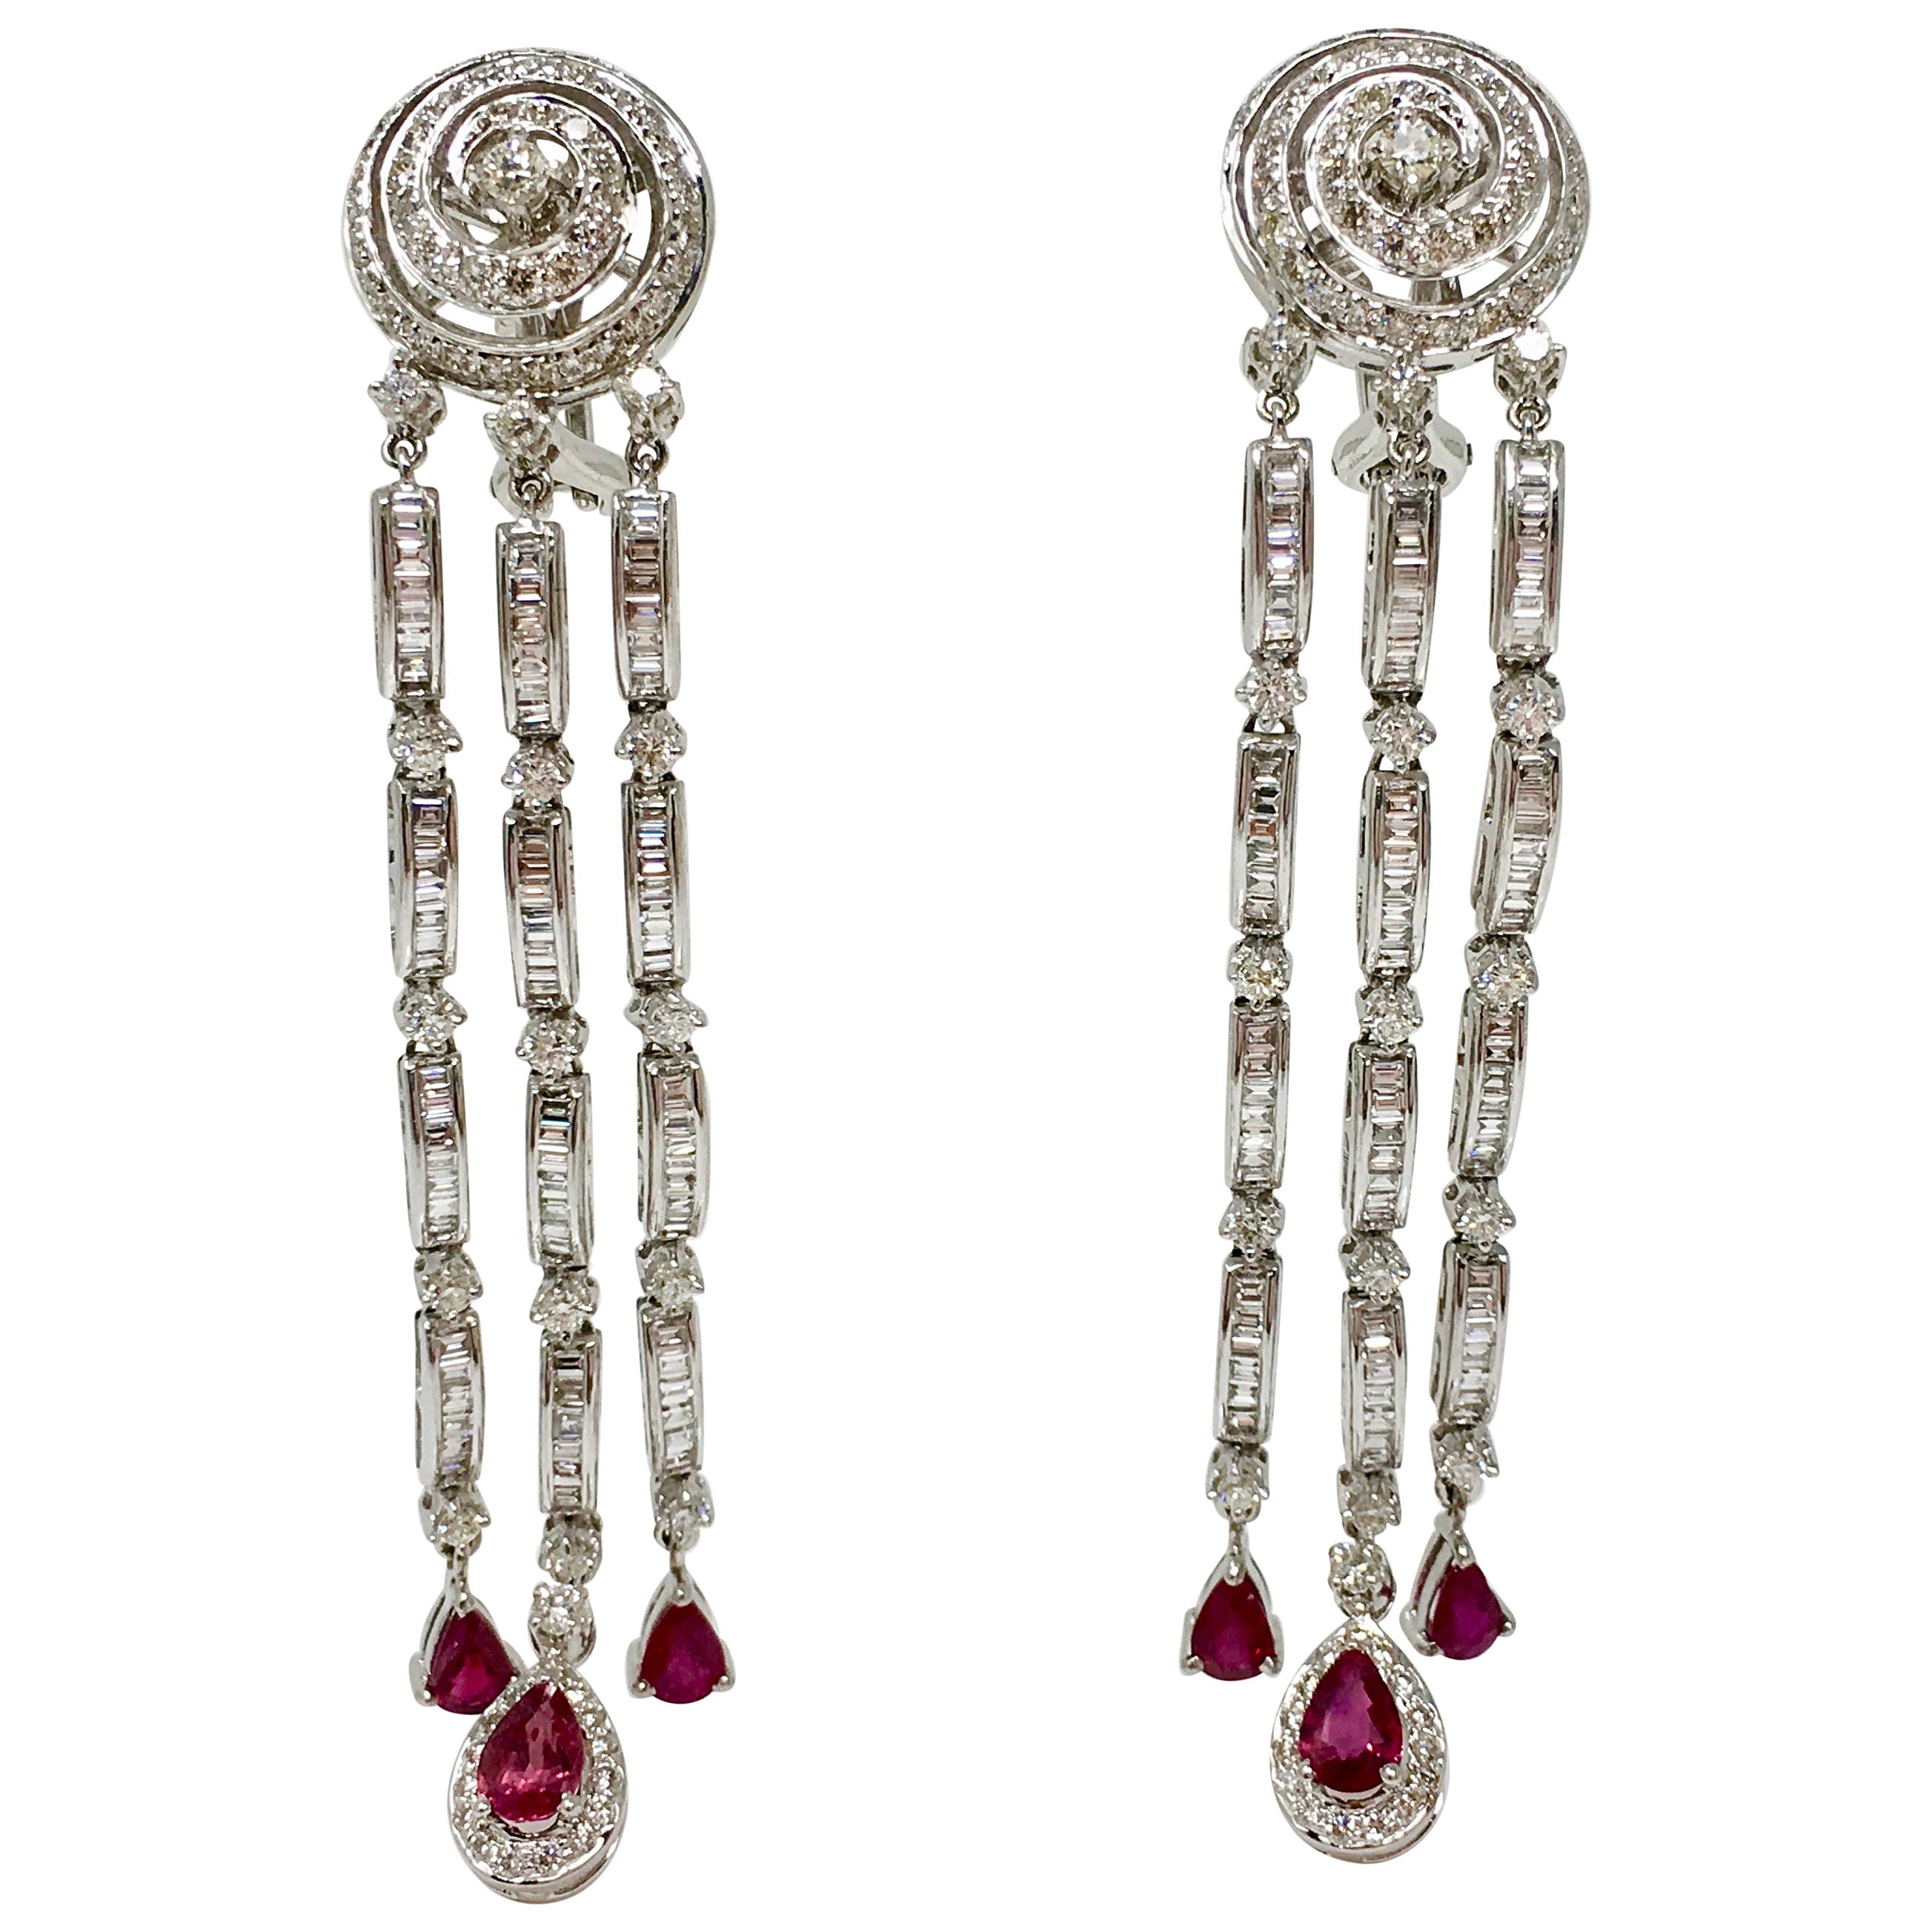 6.03 Carat White Diamond And 3.40 Carat Red Ruby Chandelier Earrings In 18K Gold For Sale